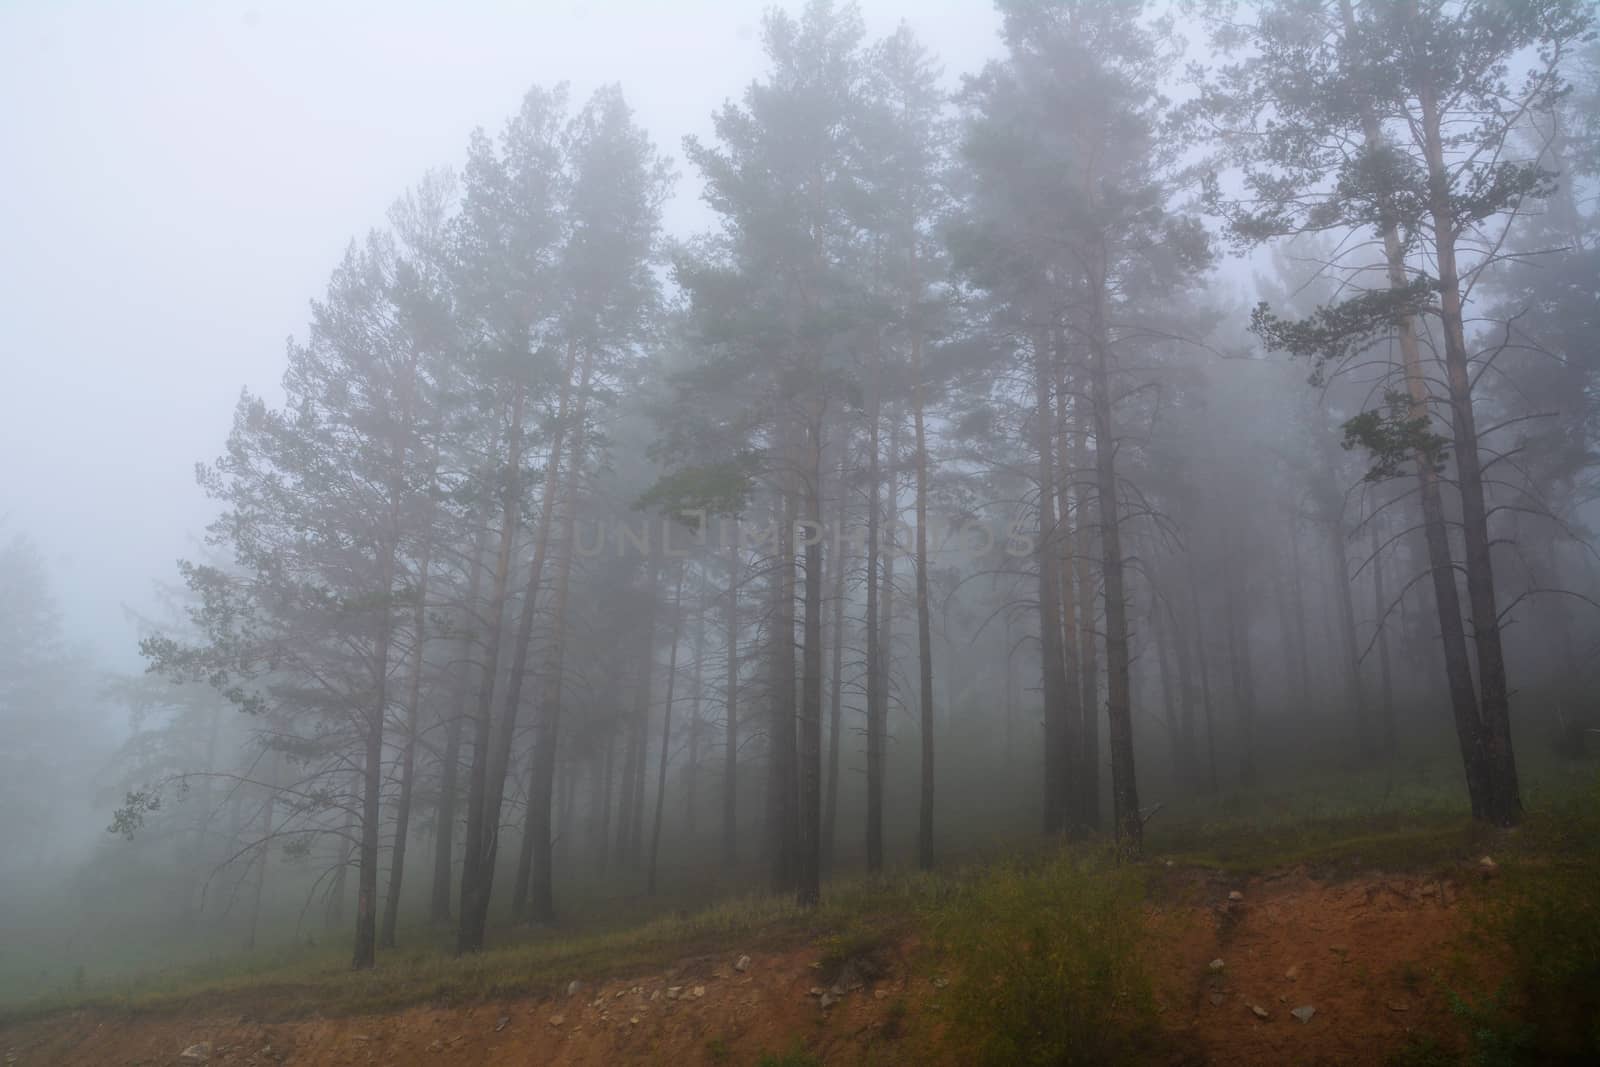 pine trees in mysterious misty fog